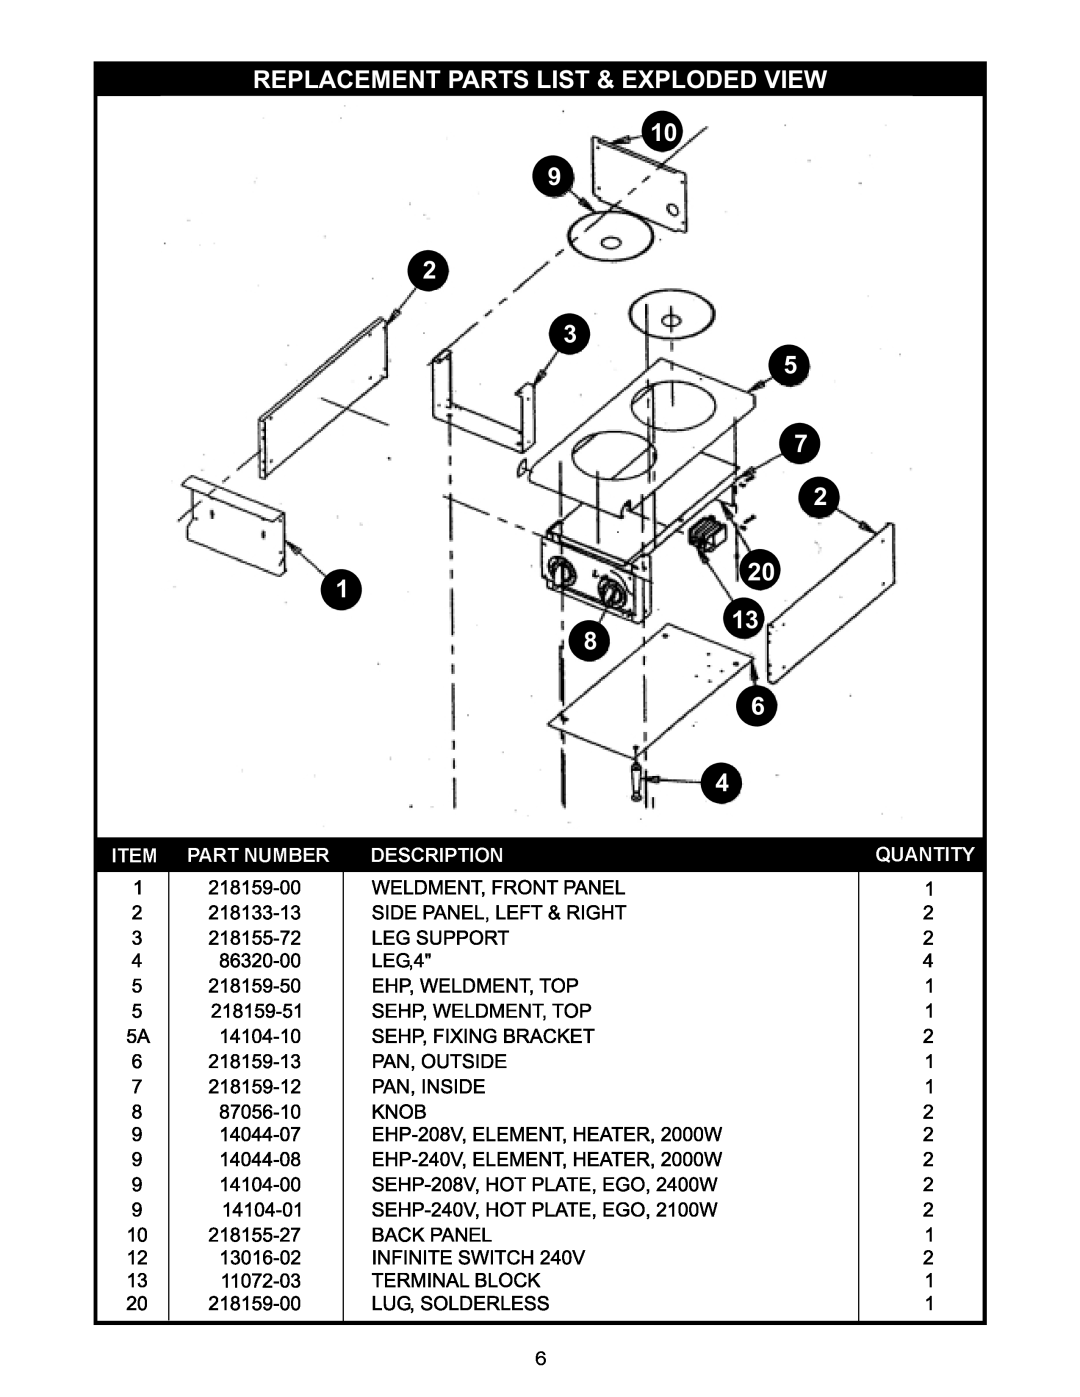 APW Wyott SEHP manual Replacement Parts List & Exploded View 